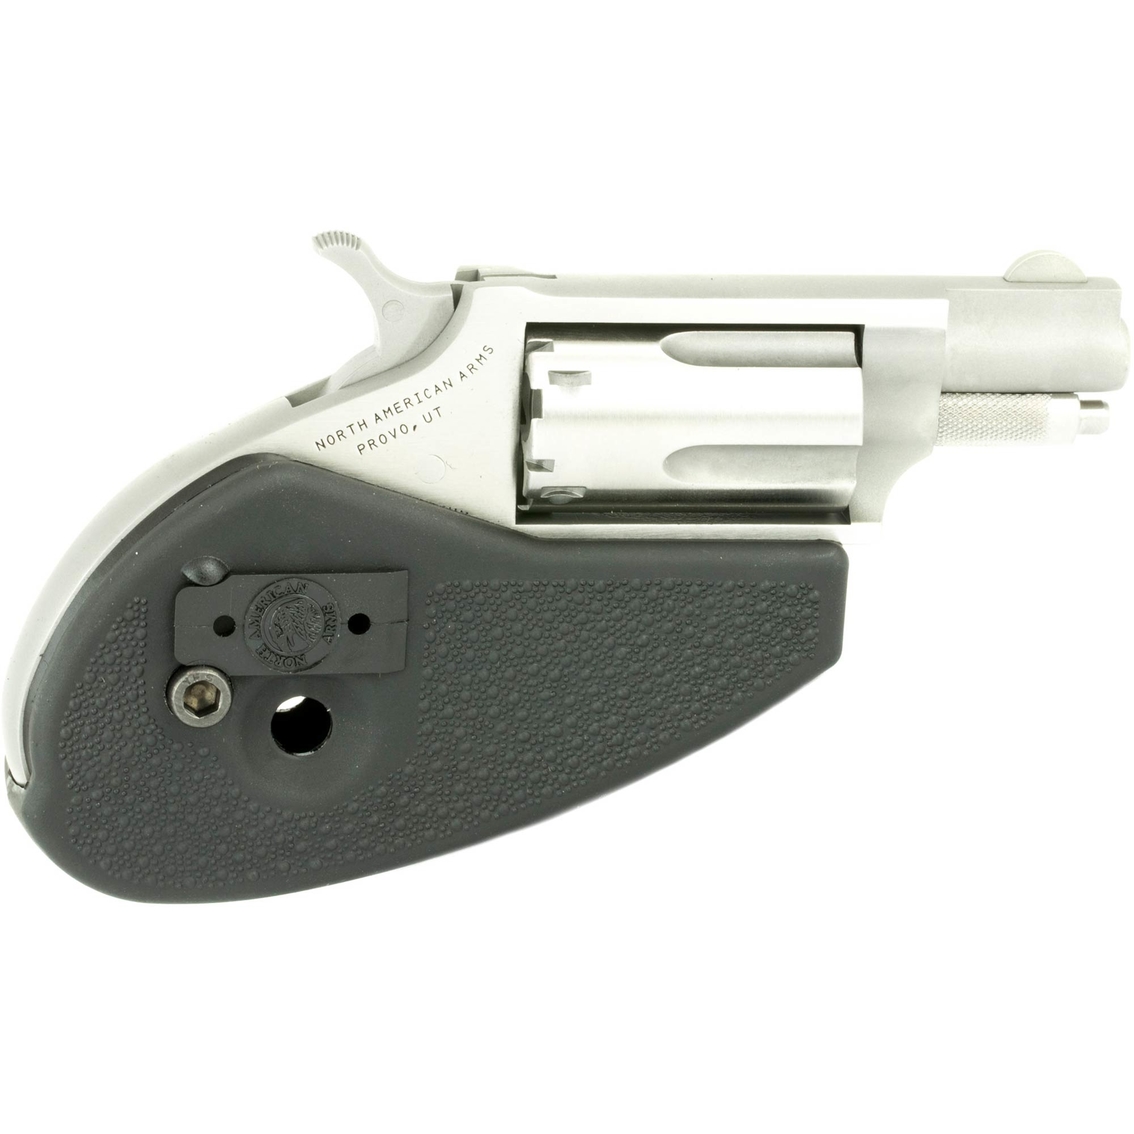 NAA Mini Revolver 22LR 22 WMR 1.125 in. Barrel 5 Rd Revolver Stainless Holster Grip - Image 4 of 4